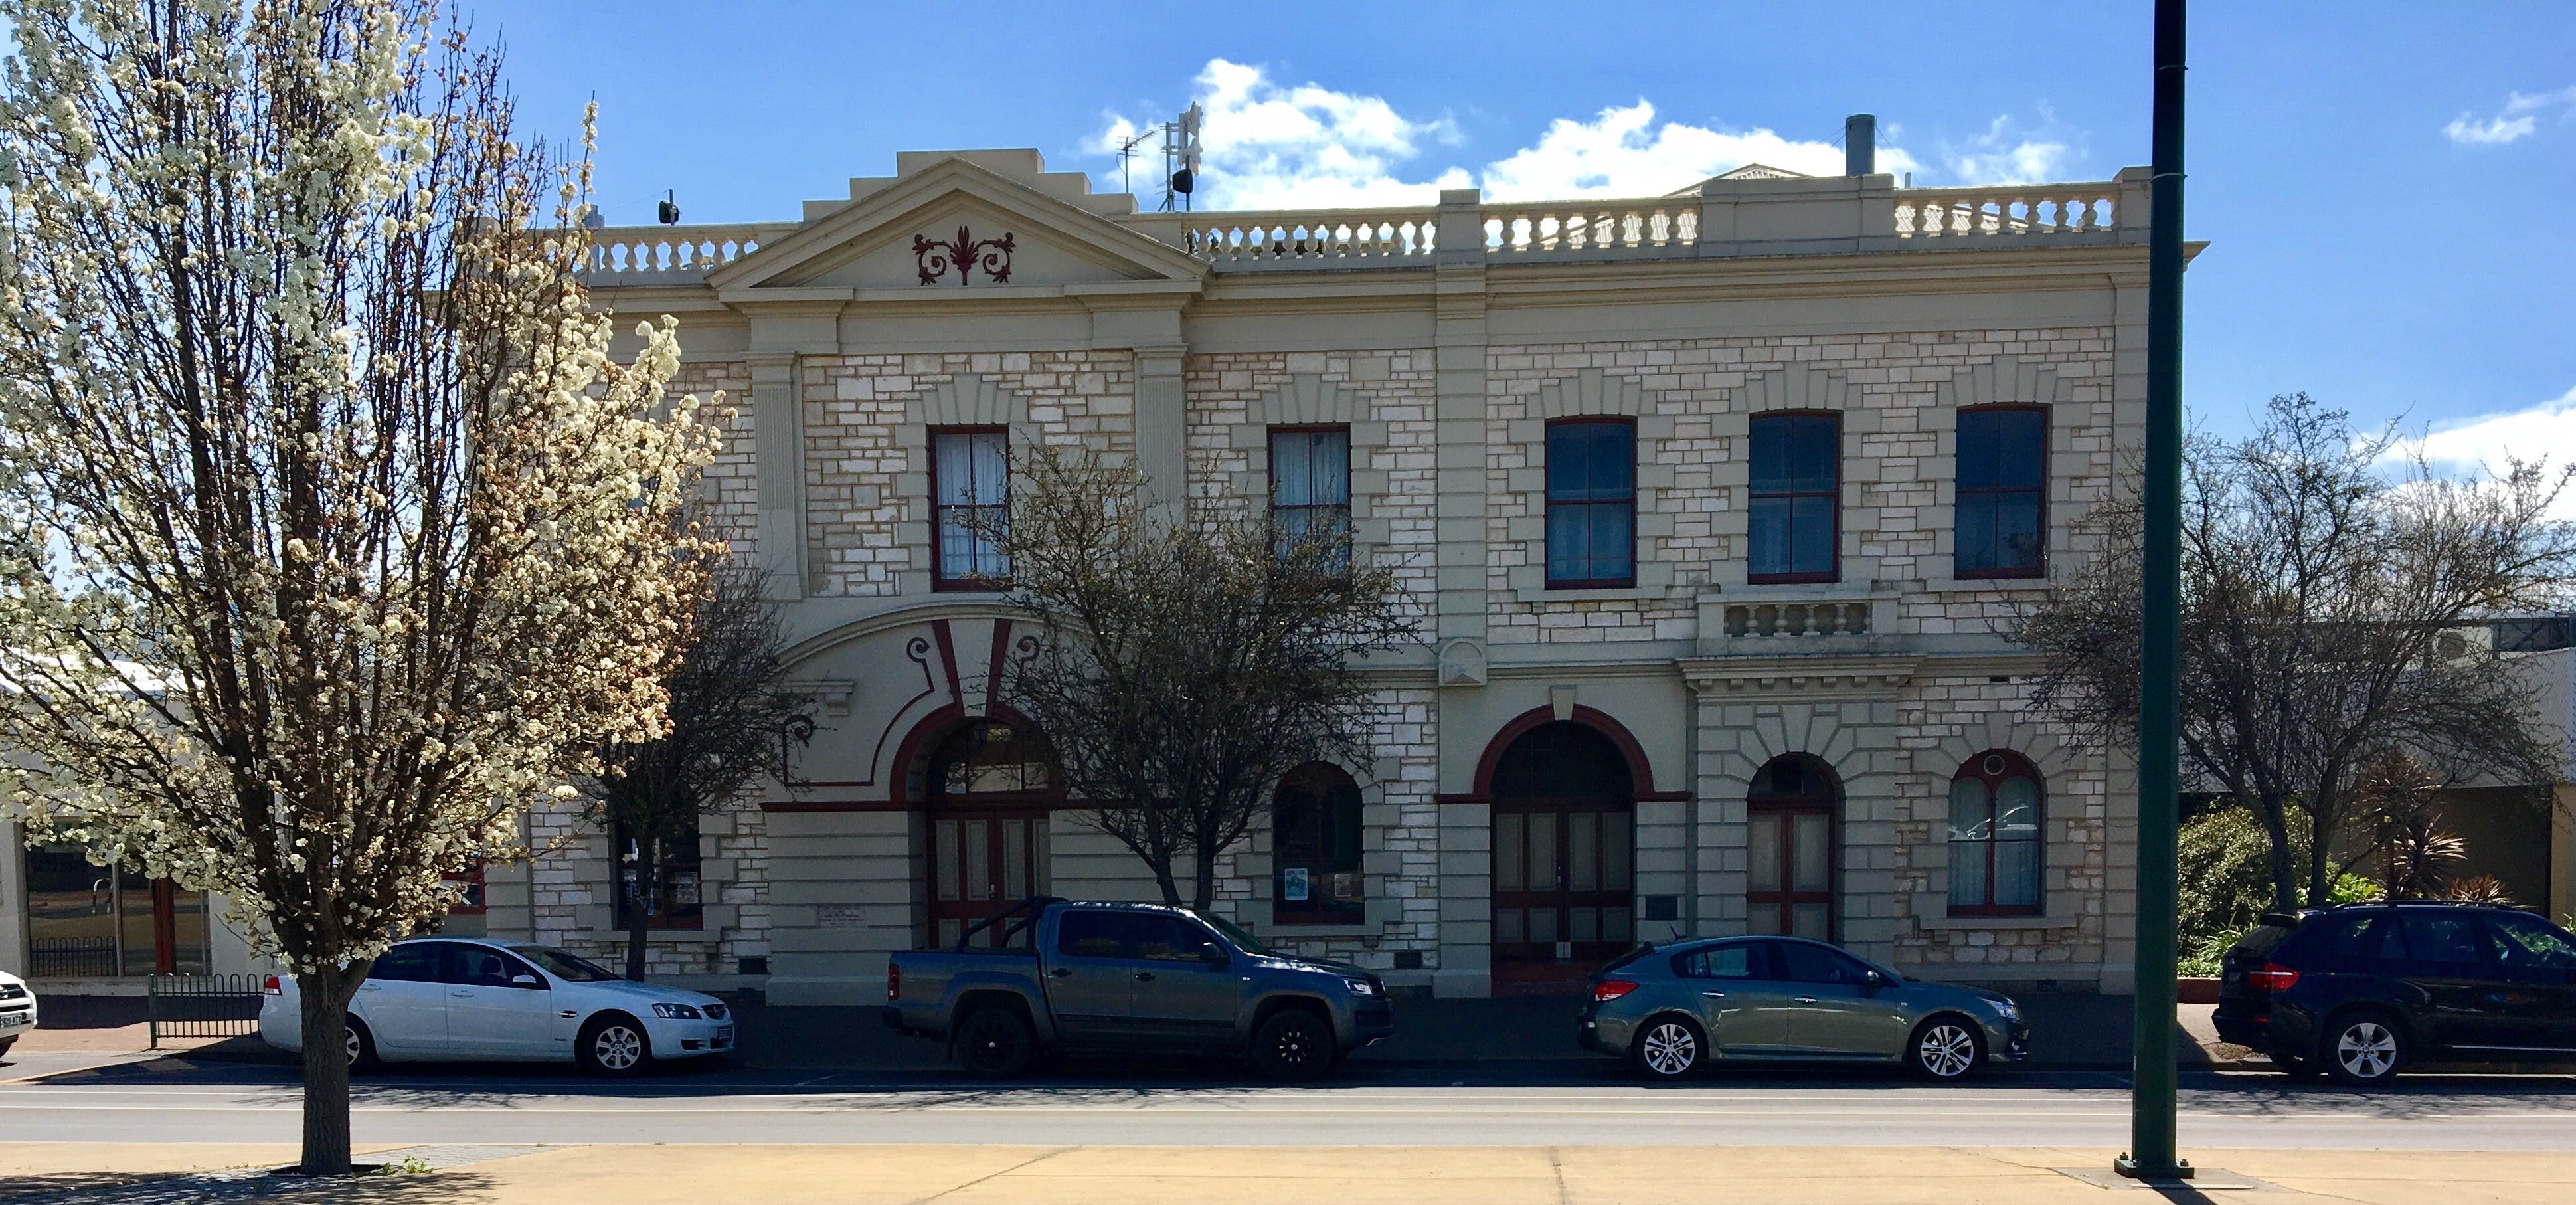 Naracoorte Town Hall - Find Attractions